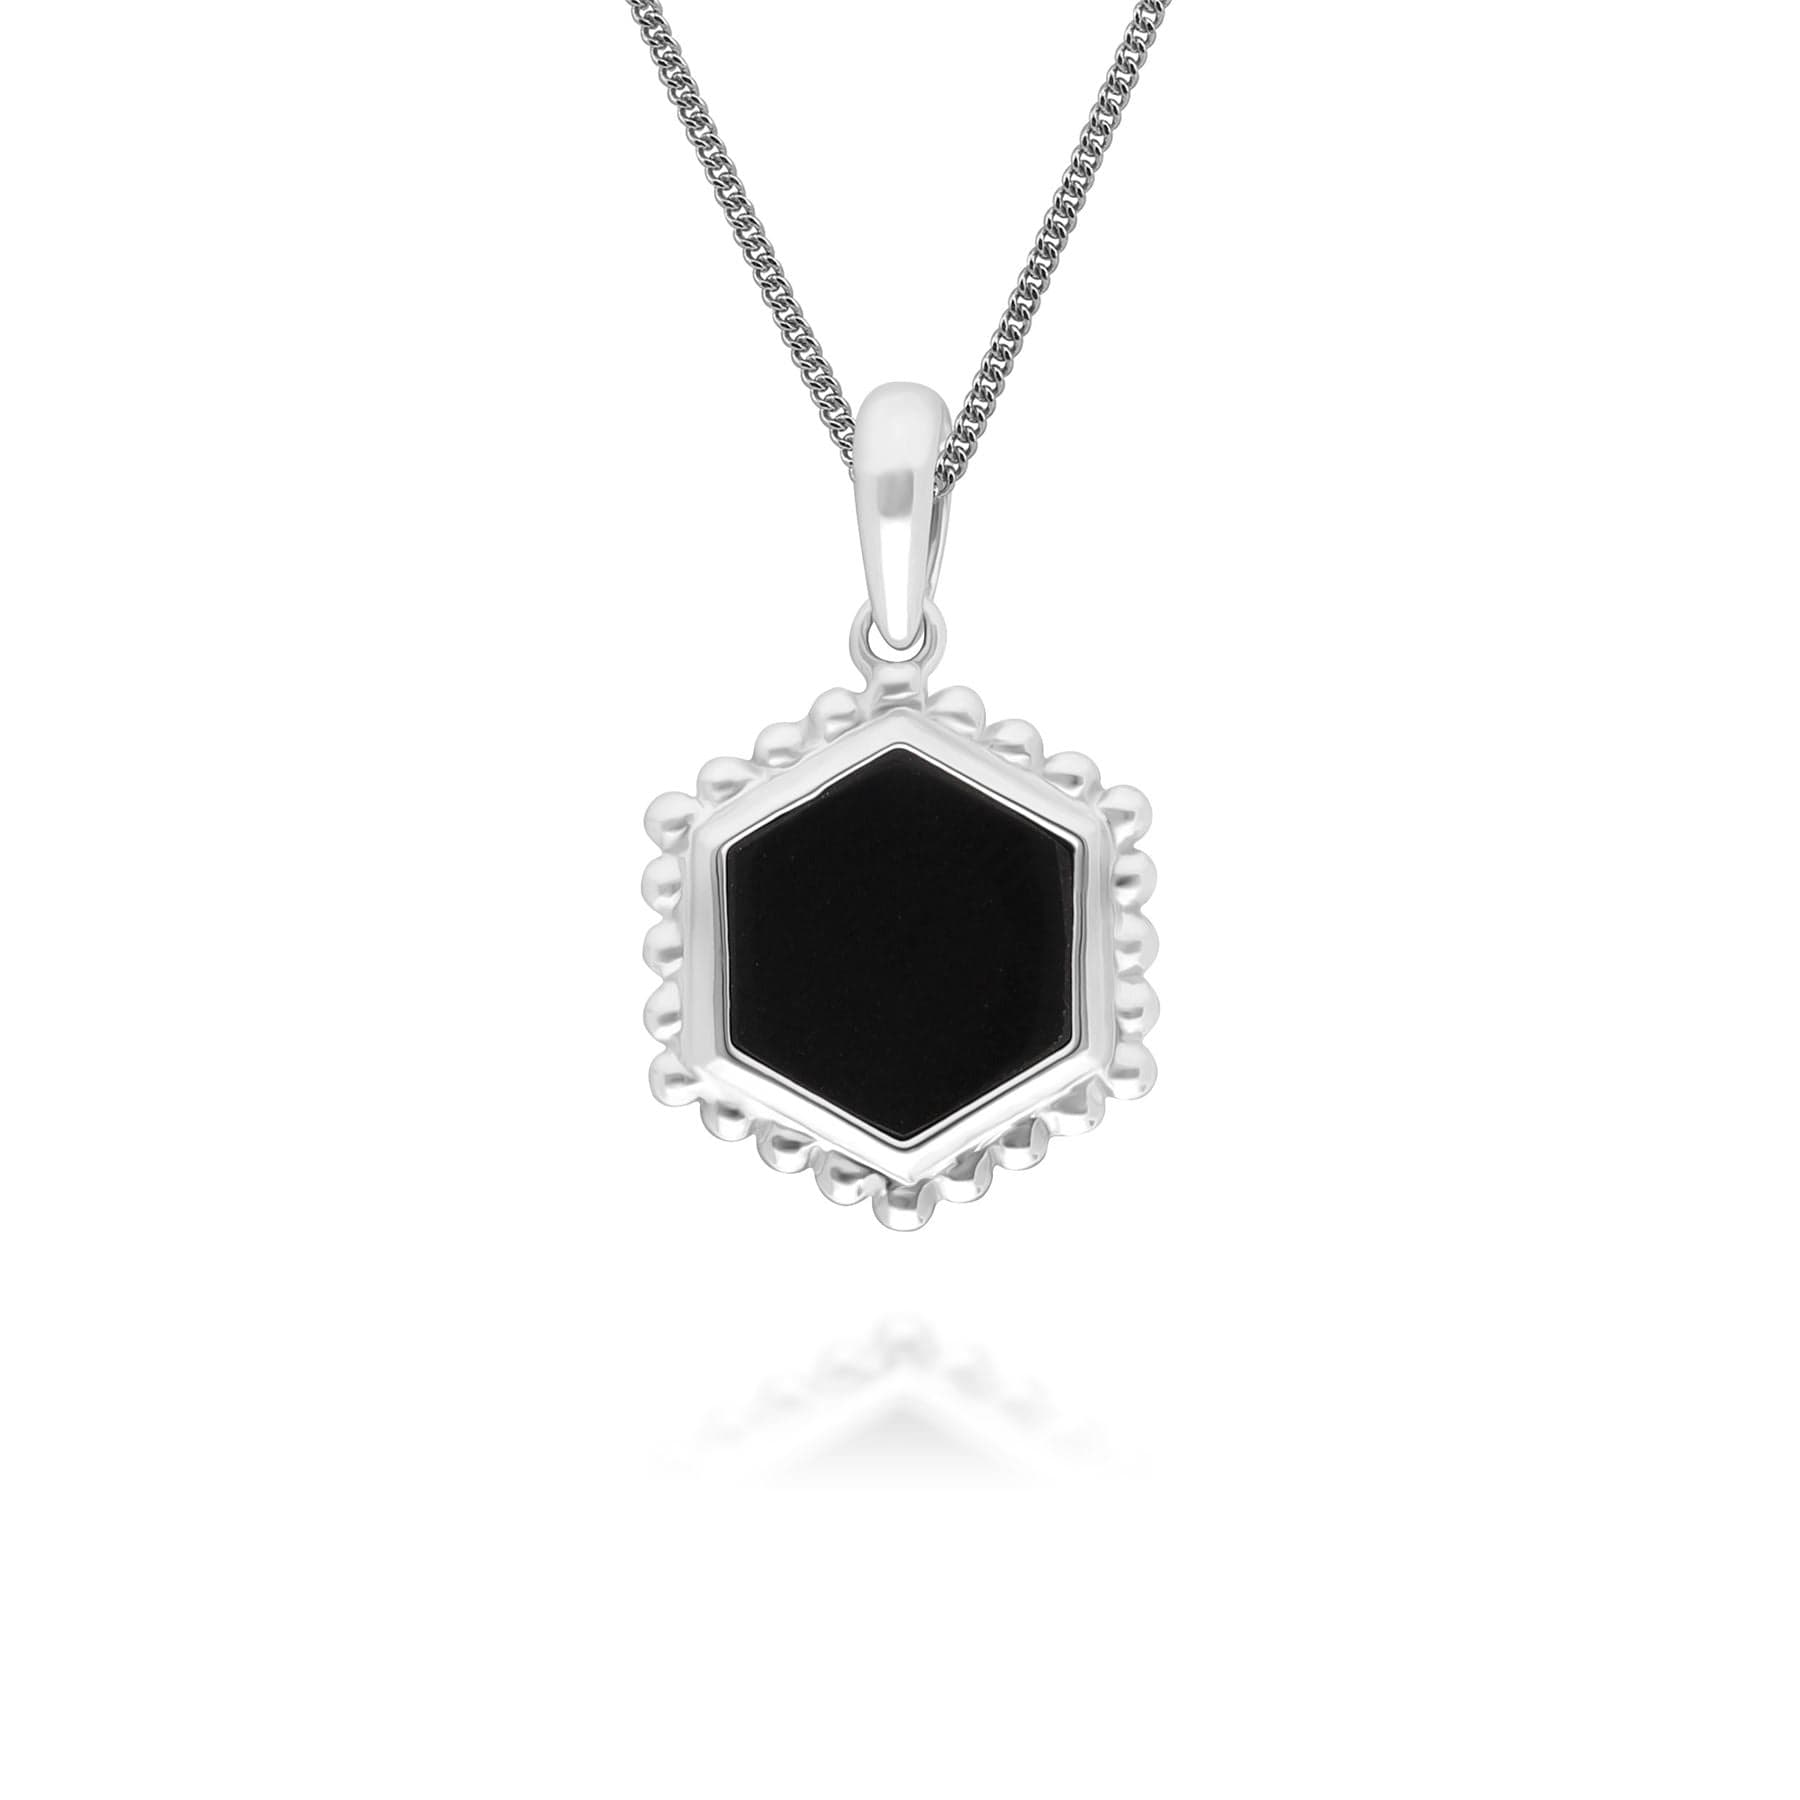 Black Onyx Slice Pendant Necklace in 925 Sterling Silver